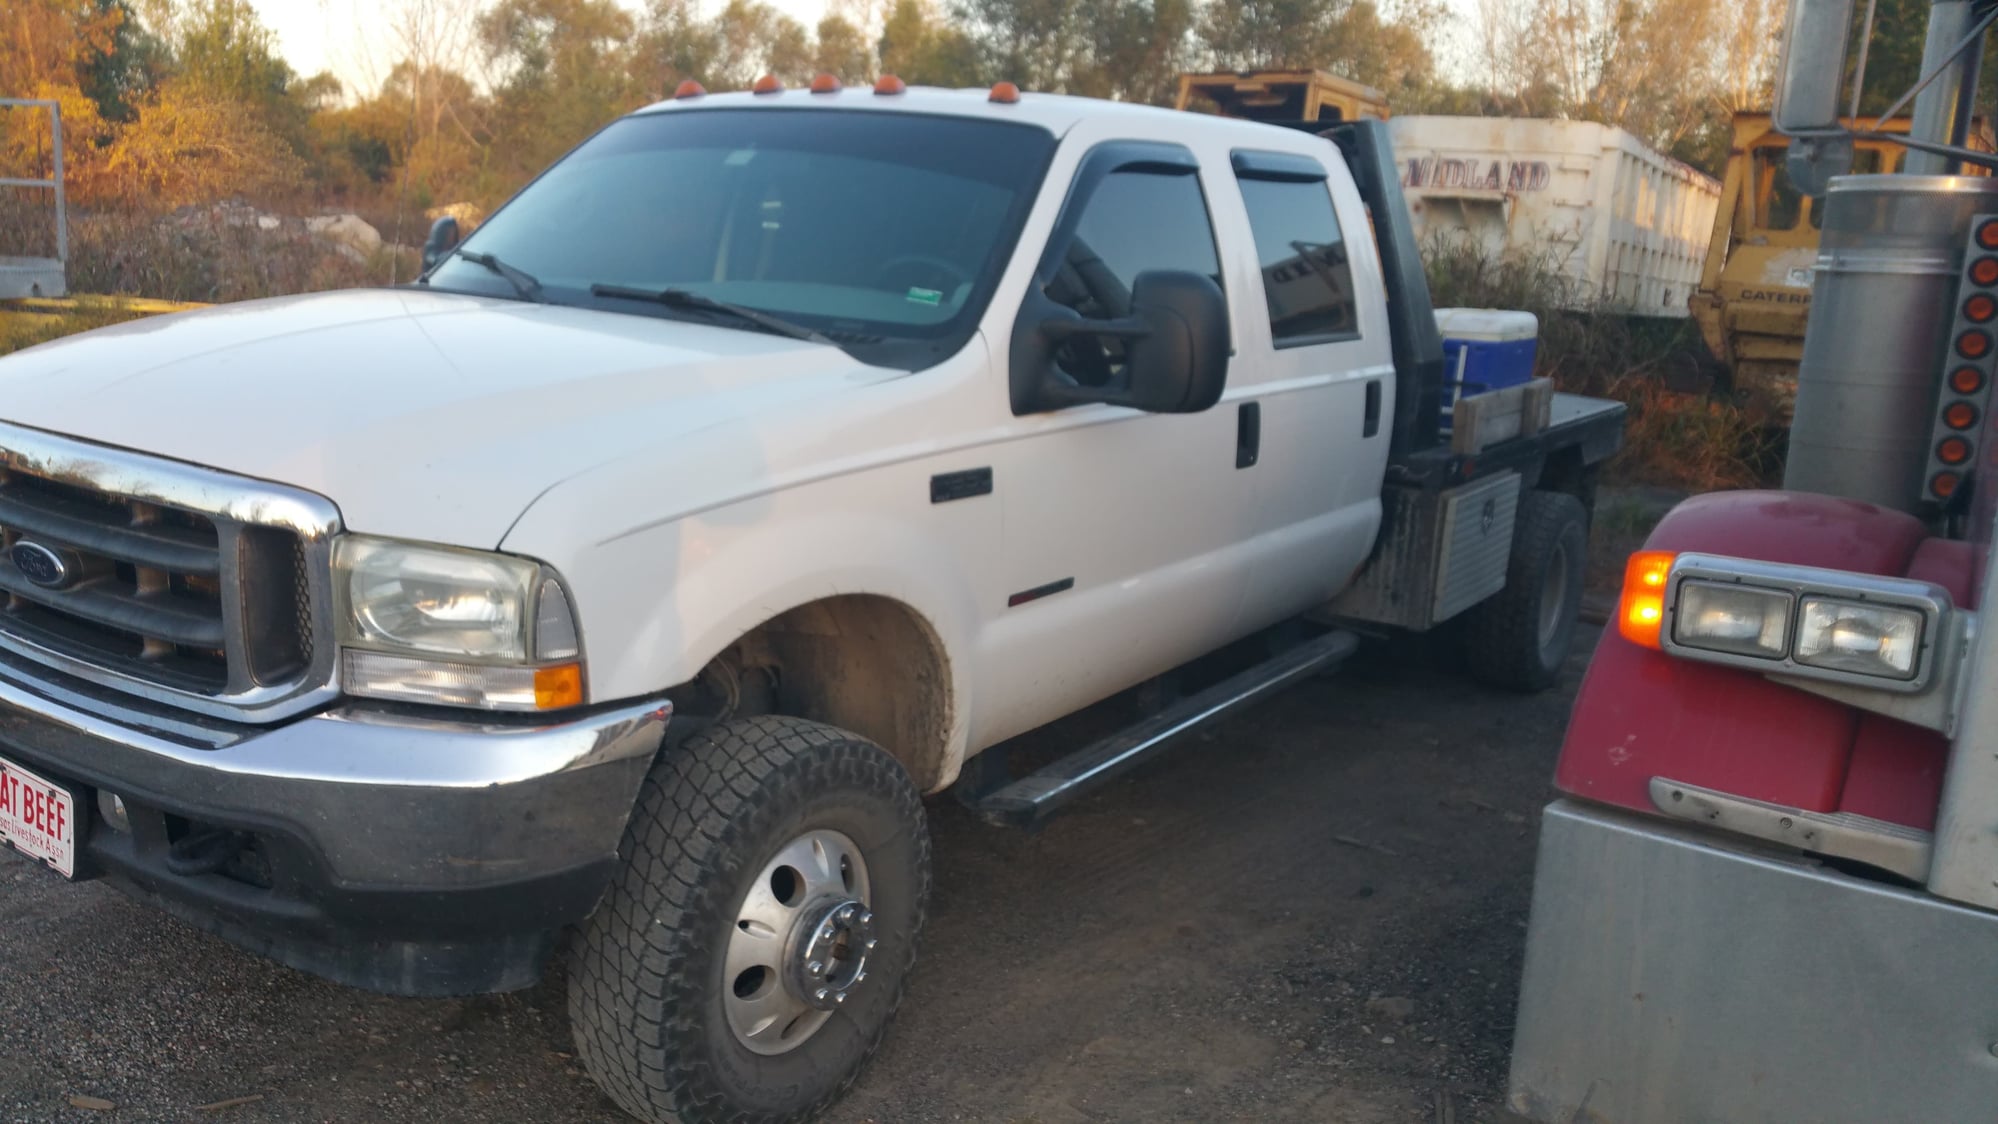 2002 Ford F-350 Super Duty - 2002 f.350 4x4 zf6 cab and chassis crew cab - Used - VIN 1FDWW37F02EA41279 - 270,000 Miles - 8 cyl - 4WD - Manual - Truck - White - Kansas City, KS 66106, United States